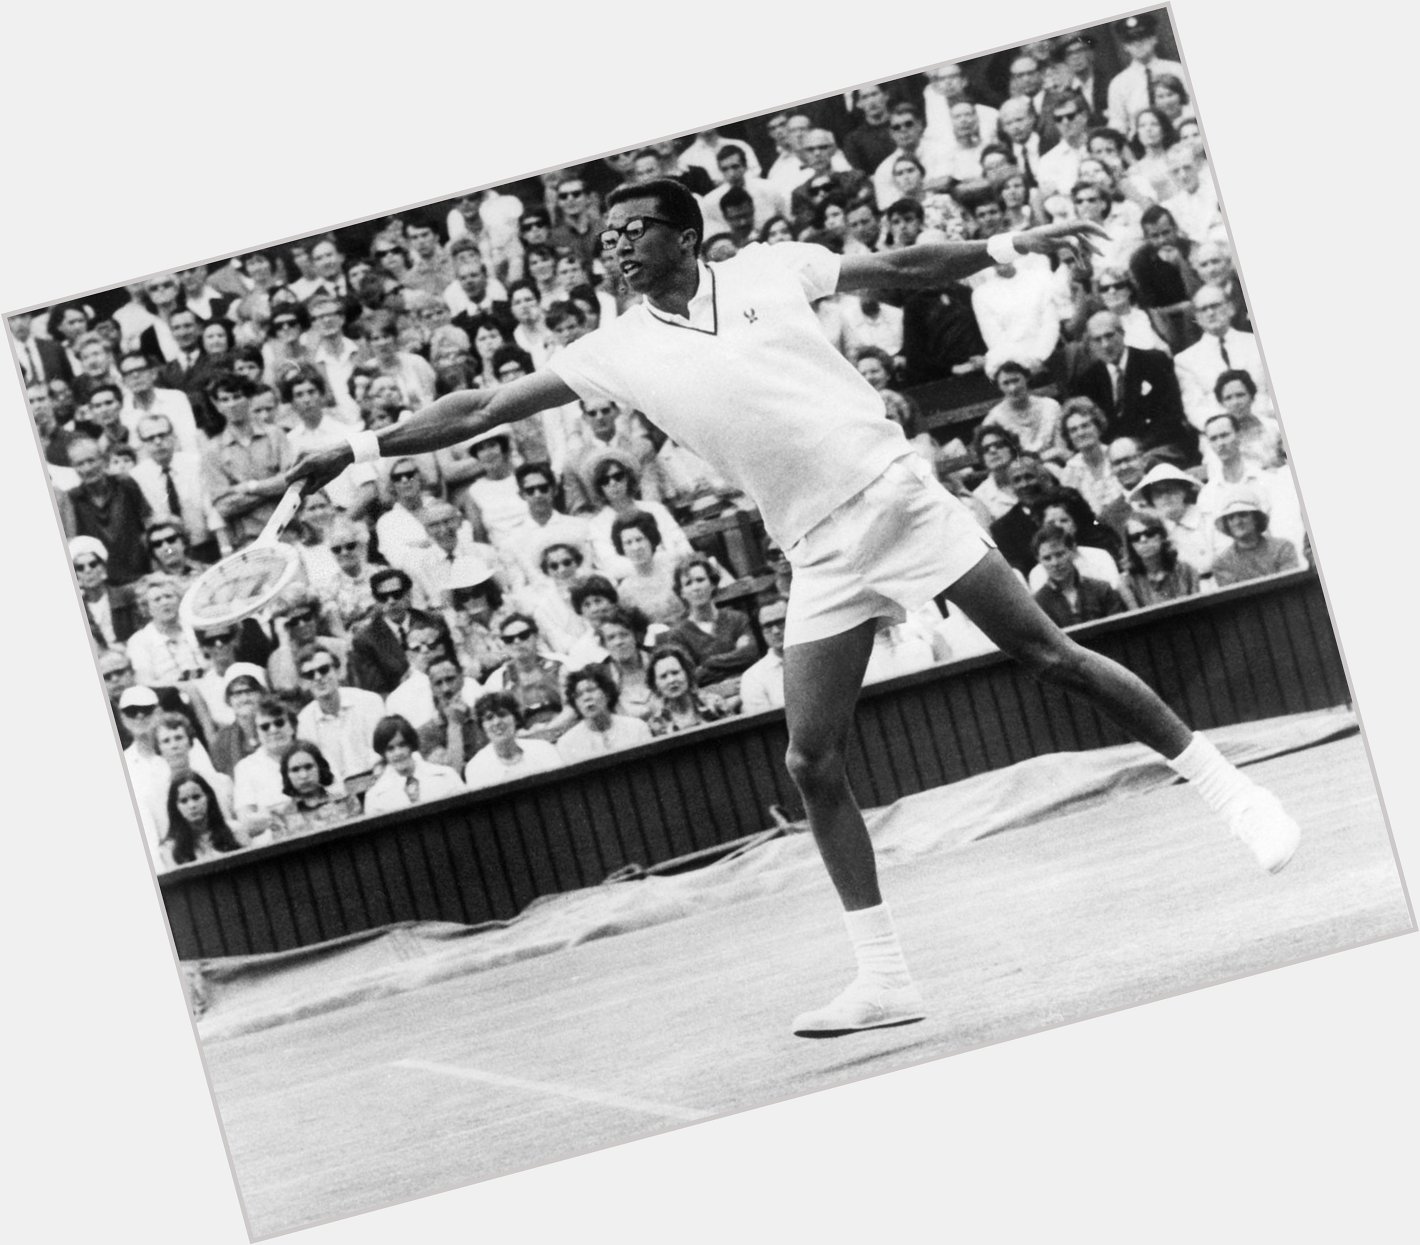 He was one of the our greatest champions and greatest people. Happy birthday to the legendary Arthur Ashe. 